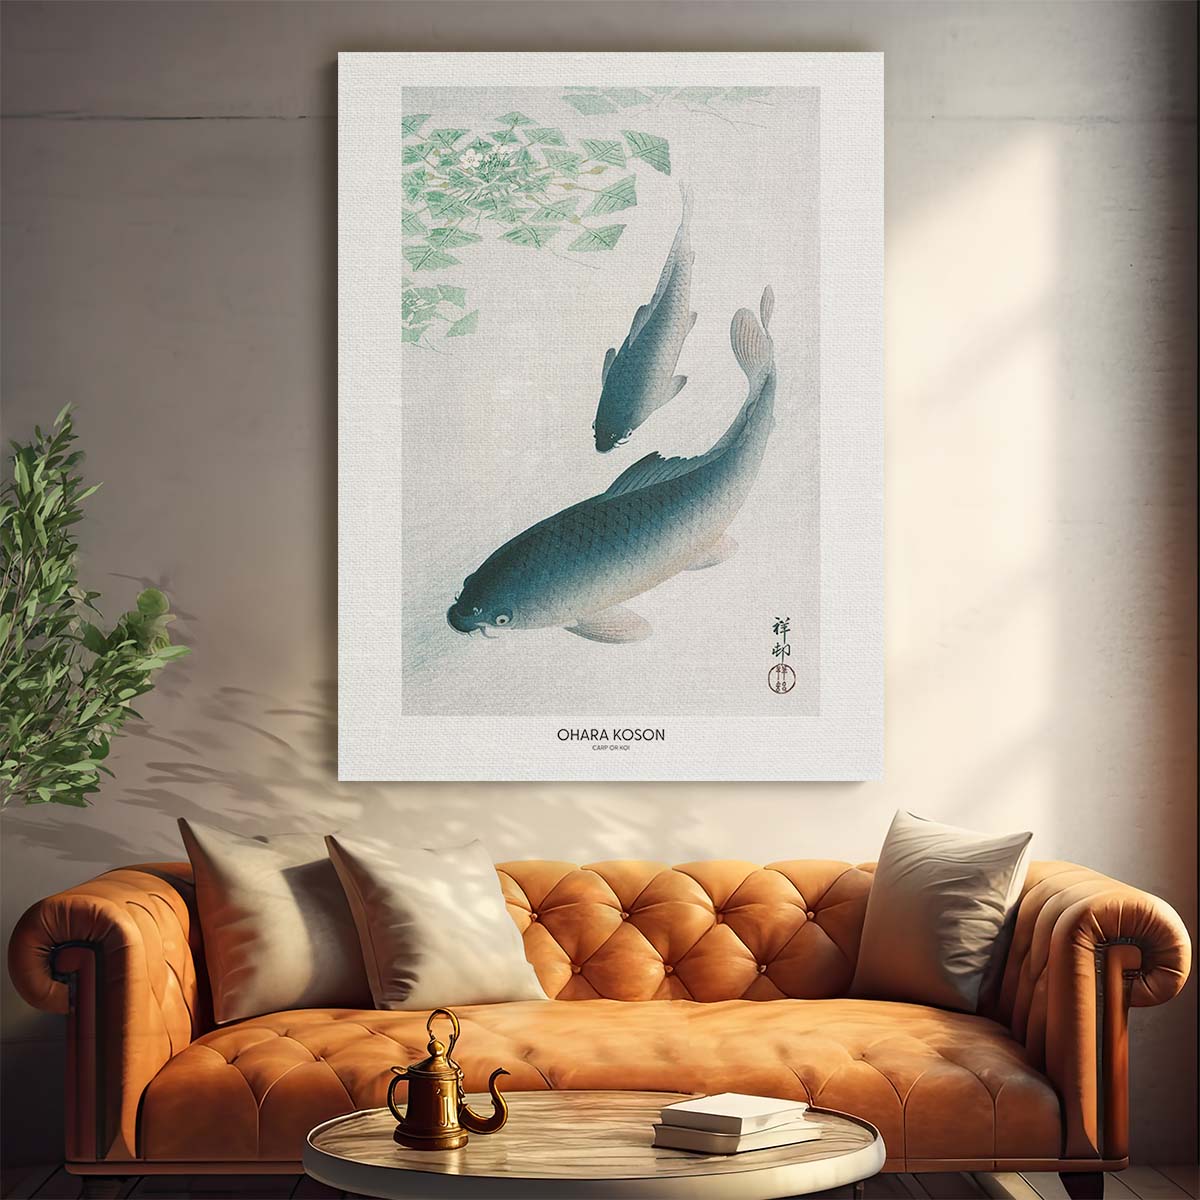 Vintage Ohara Koson Koi Fish Japanese Art Illustration Poster by Luxuriance Designs, made in USA